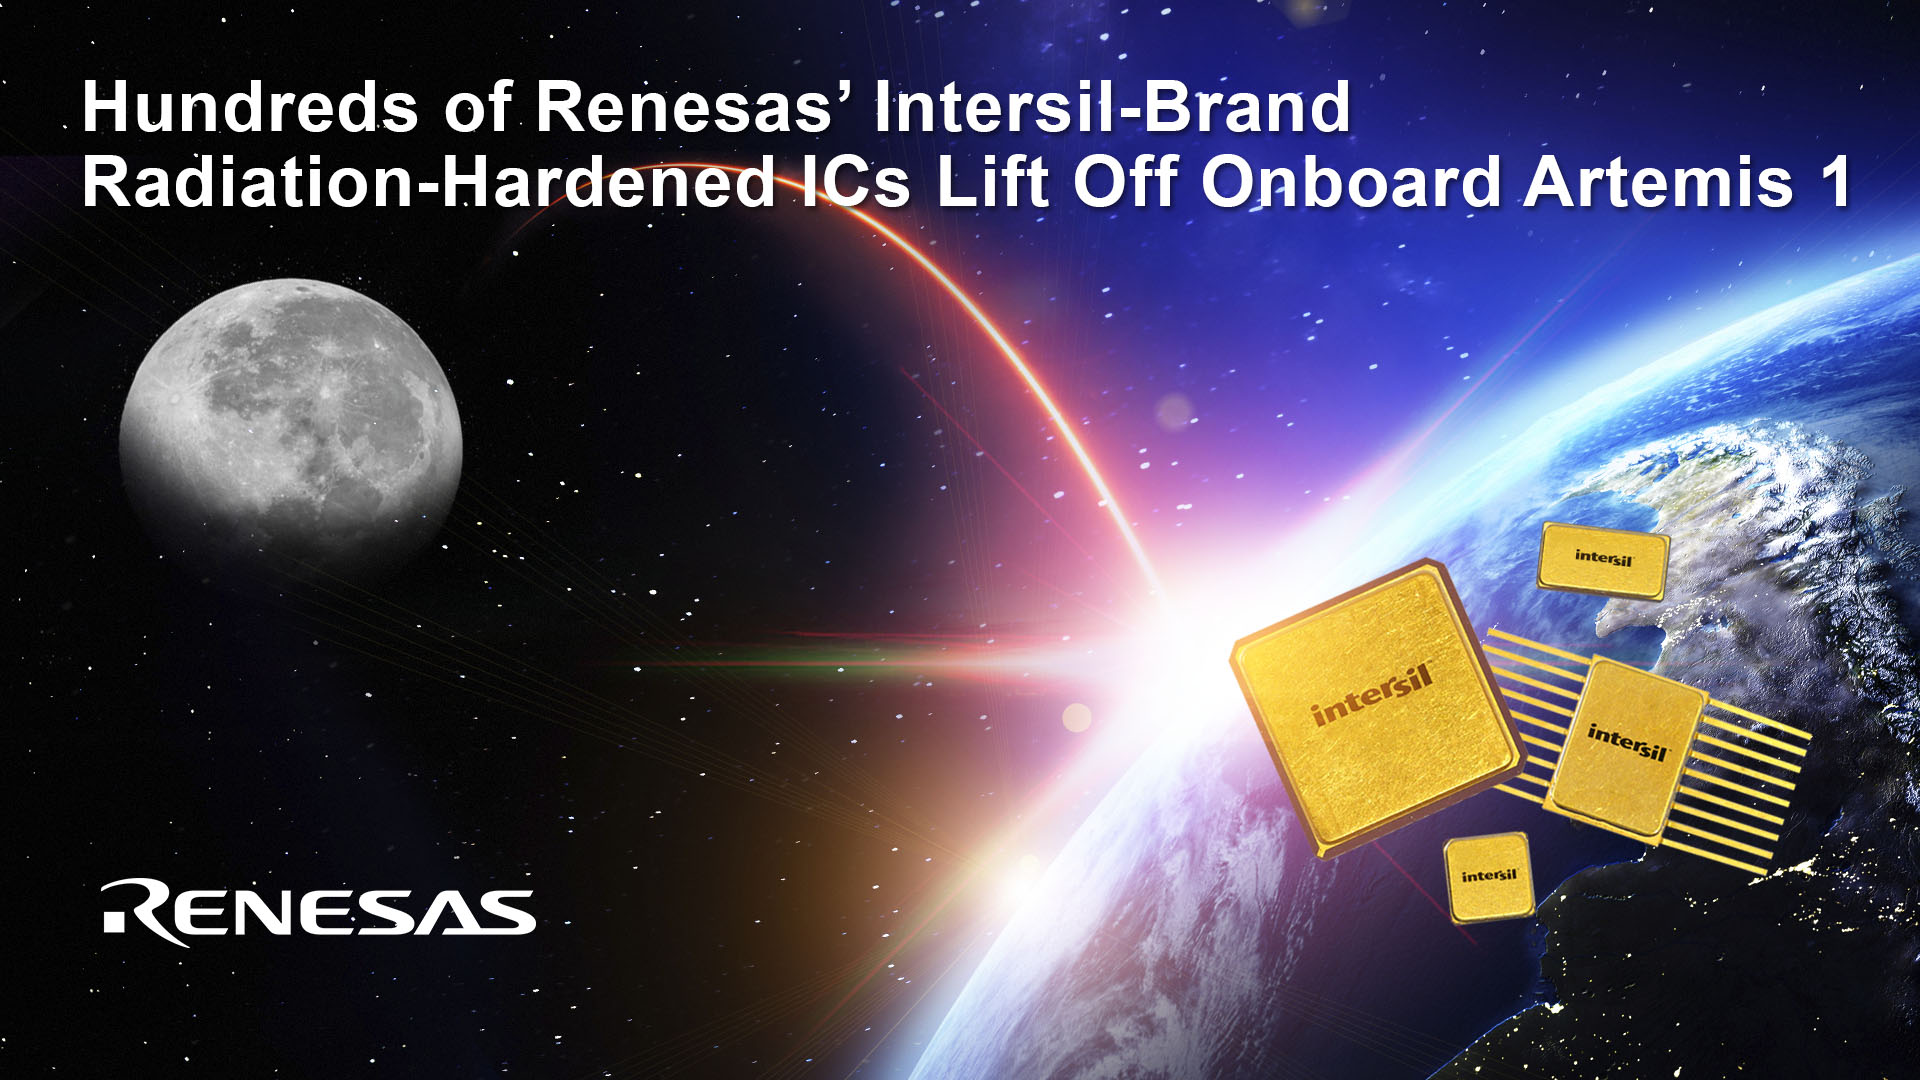 Hundreds of Renesas' Intersil-Brand Radiation-Hardened ICs Lift Off Onboard Artemis 1 Mission to the Moon